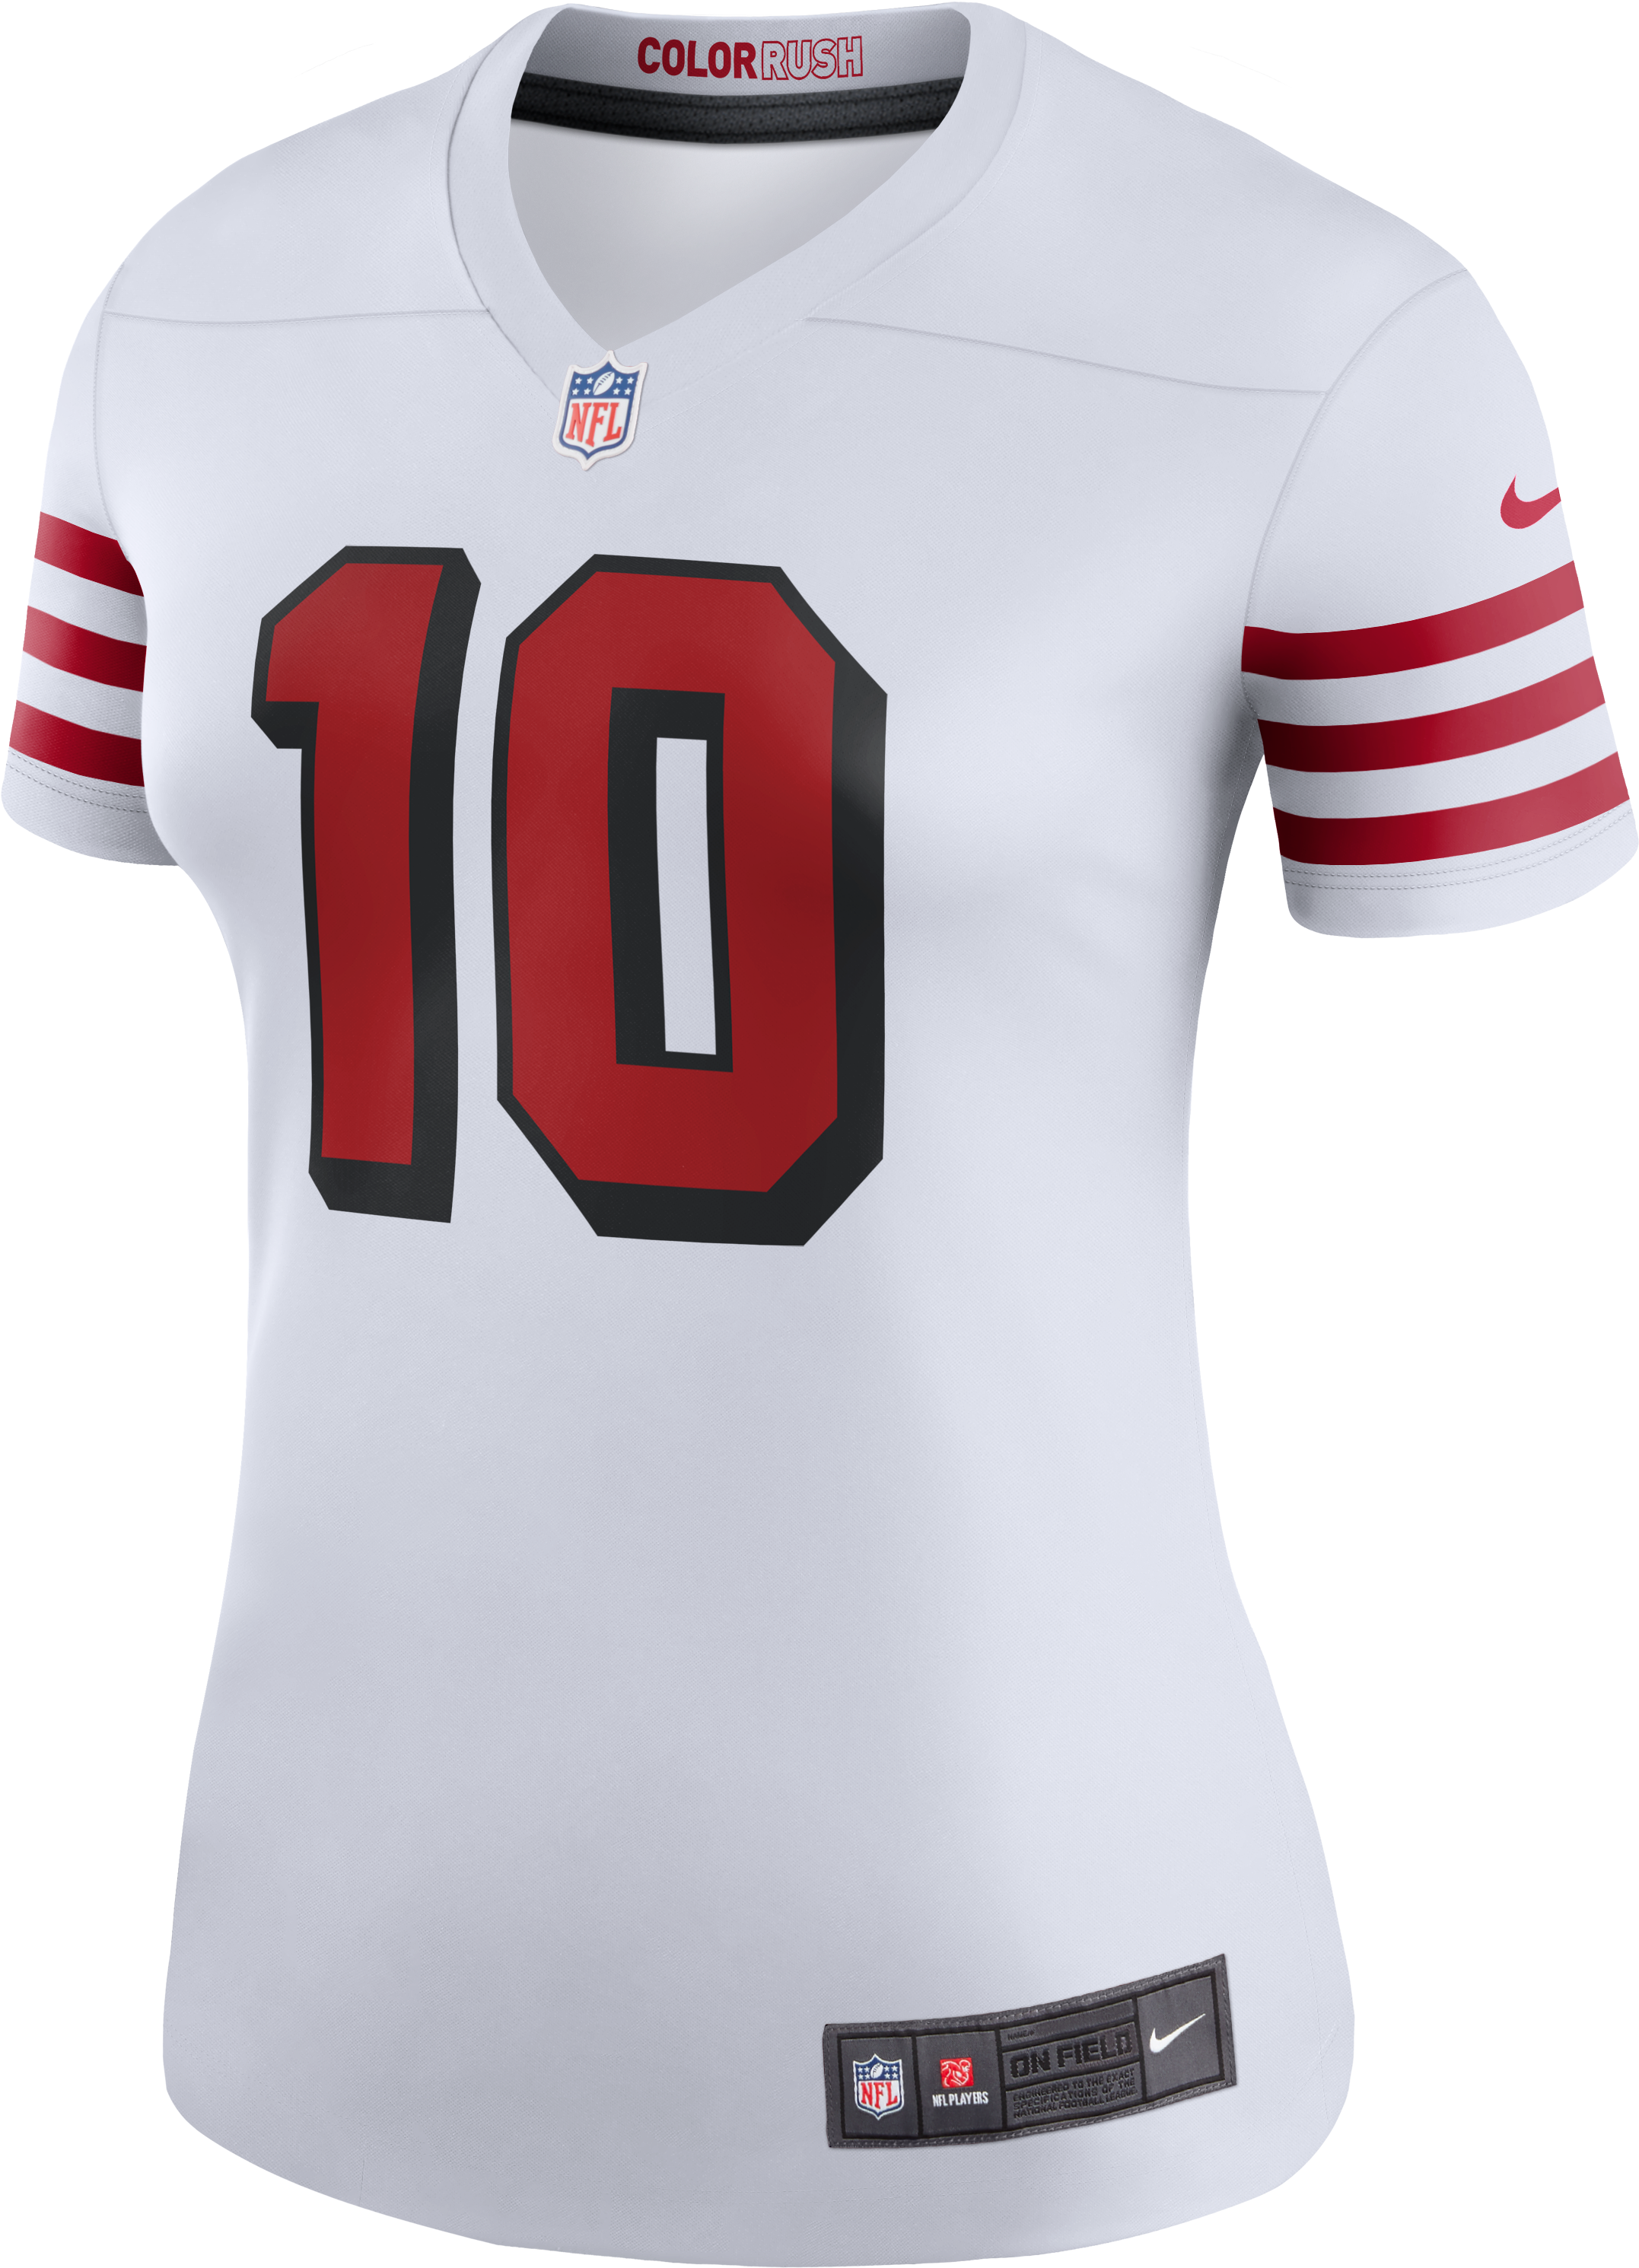 Jimmy Garoppolo 49ers New Throwback Alternate Uniform - 49ers Throwback Jersey 2018 (3144x3144), Png Download